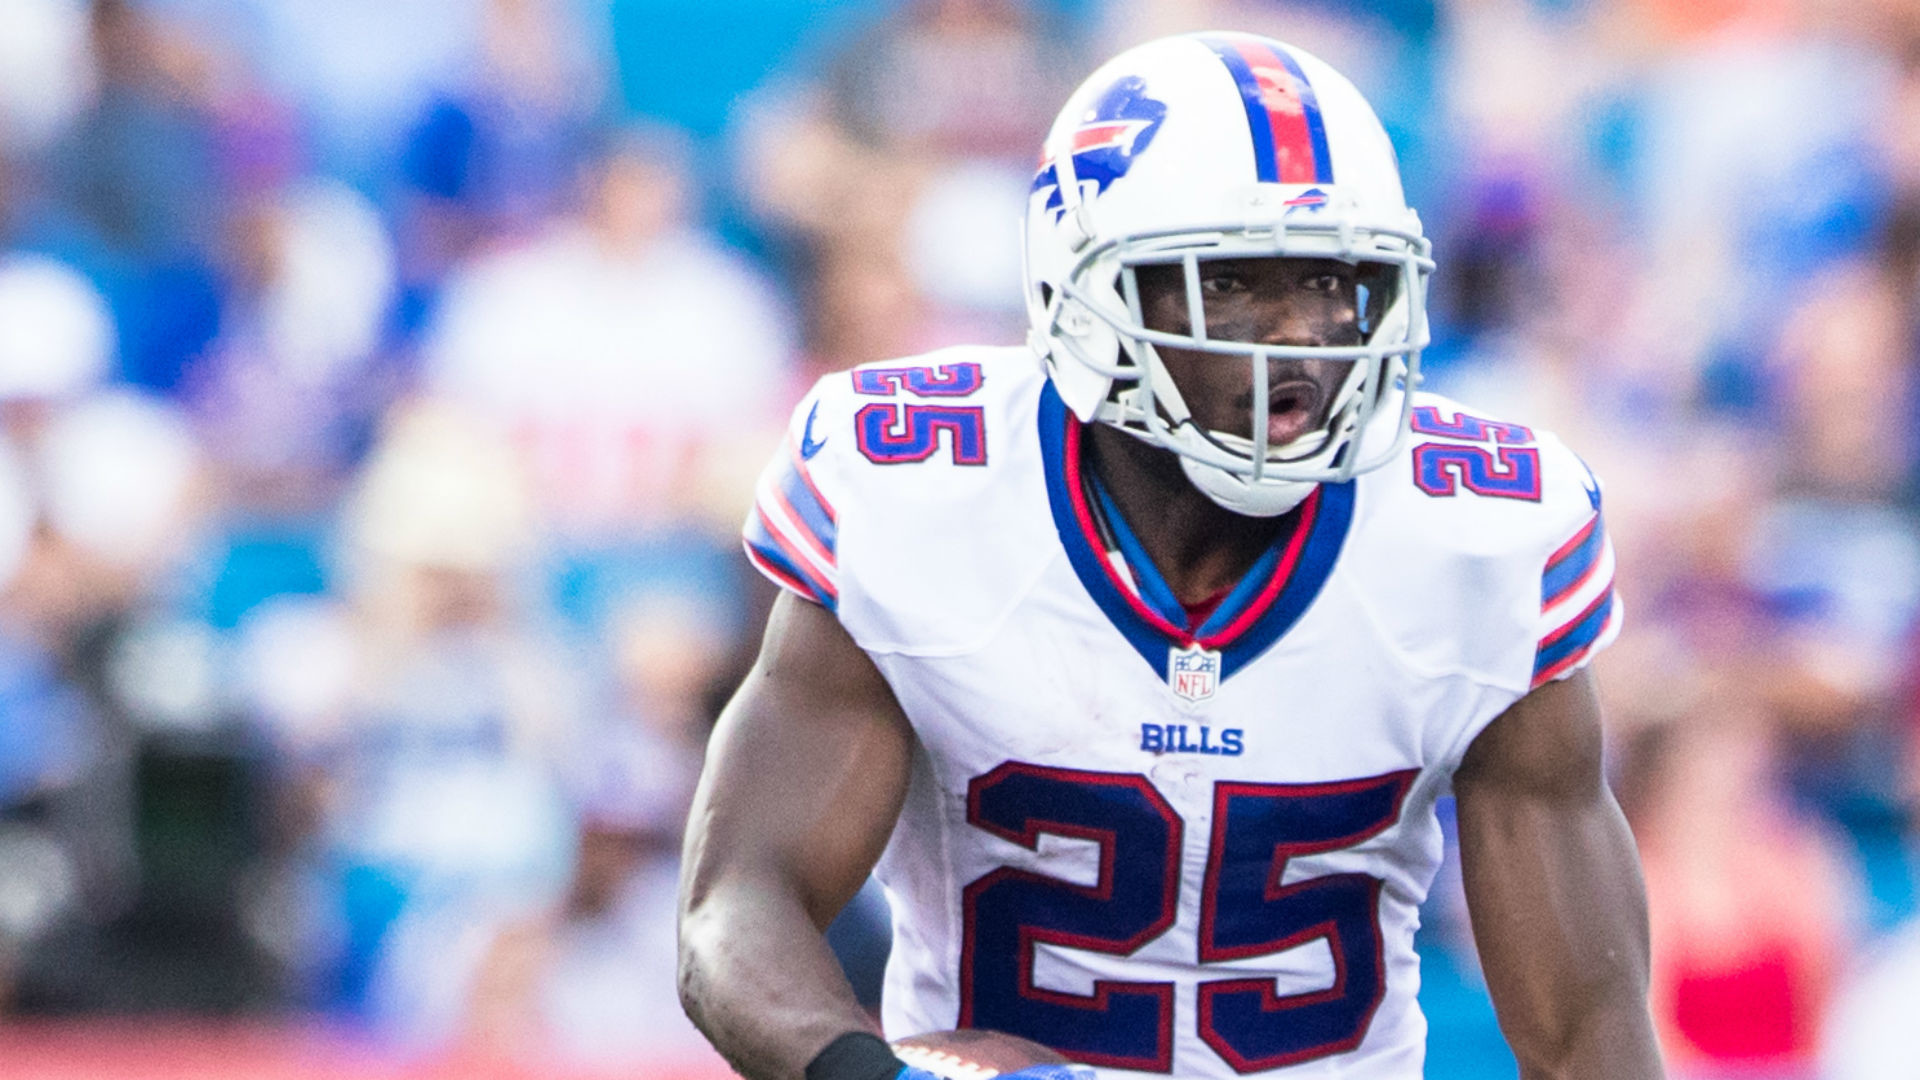 1920x1080 LeSean McCoy will be active Sunday for Bills vs. Dolphins, report says |  NFL | Sporting News